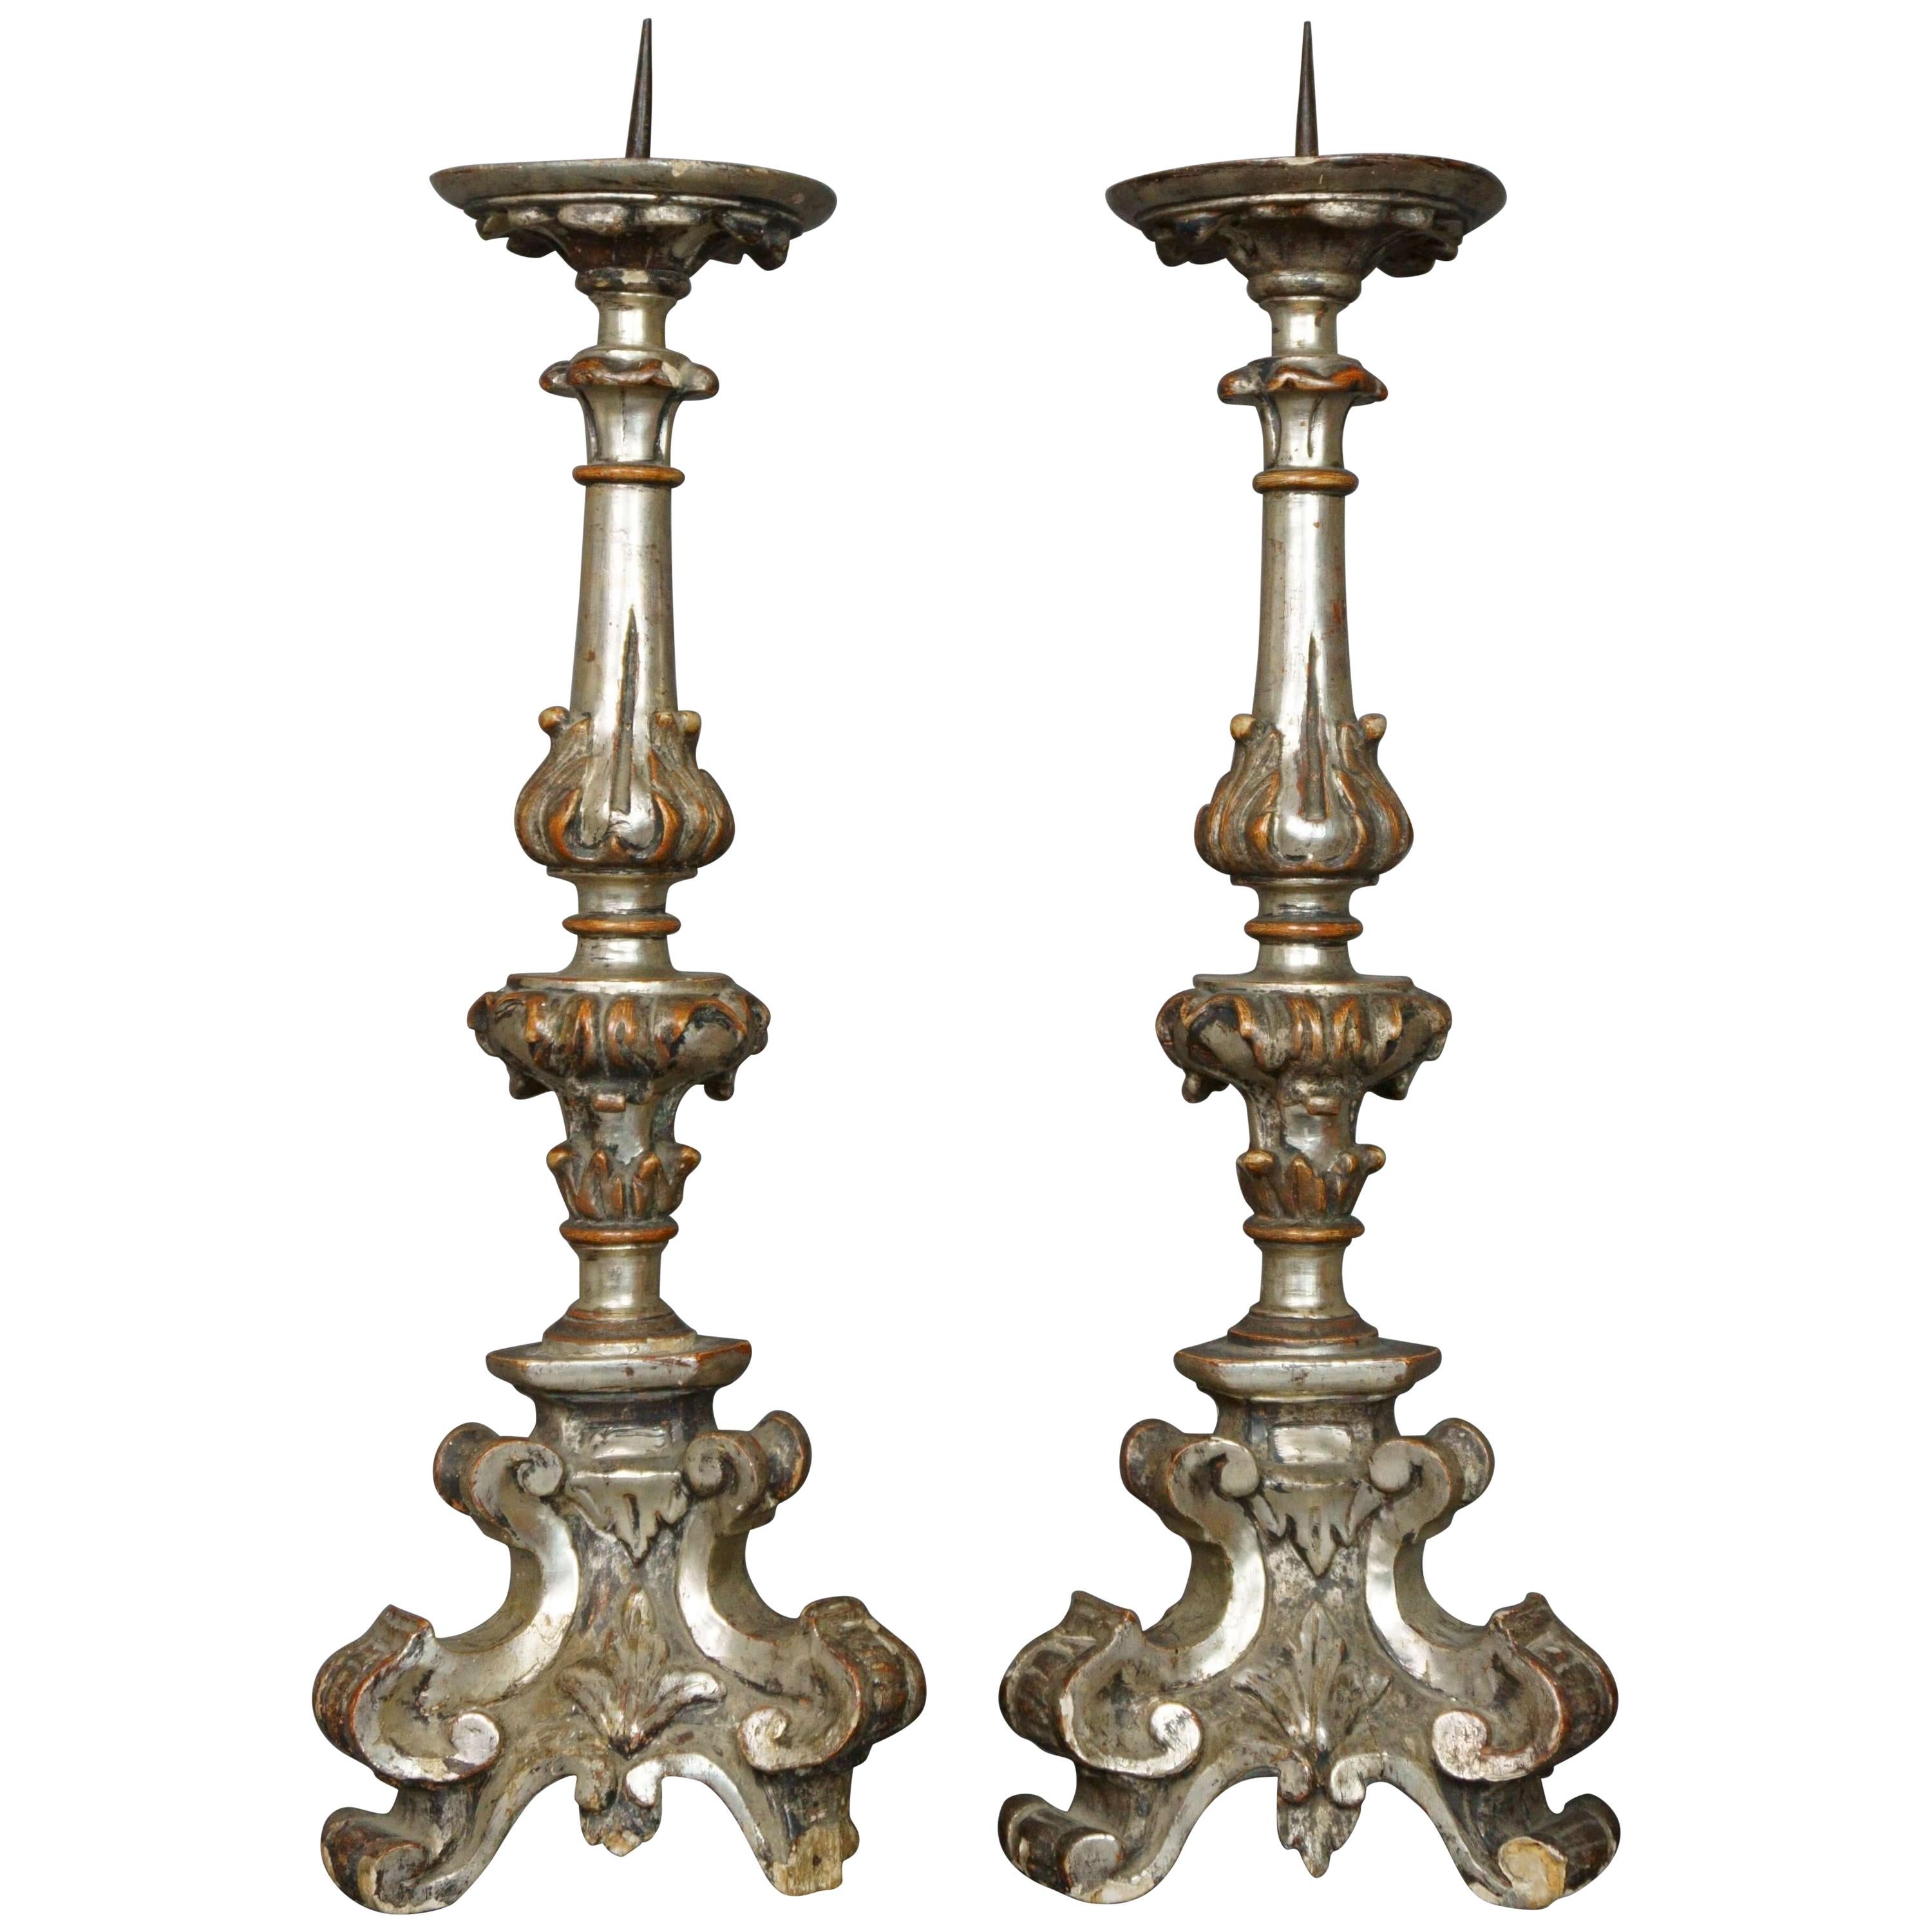 17th Century Louis XIV Italian Carved and Silvered Wood Church Candelabras